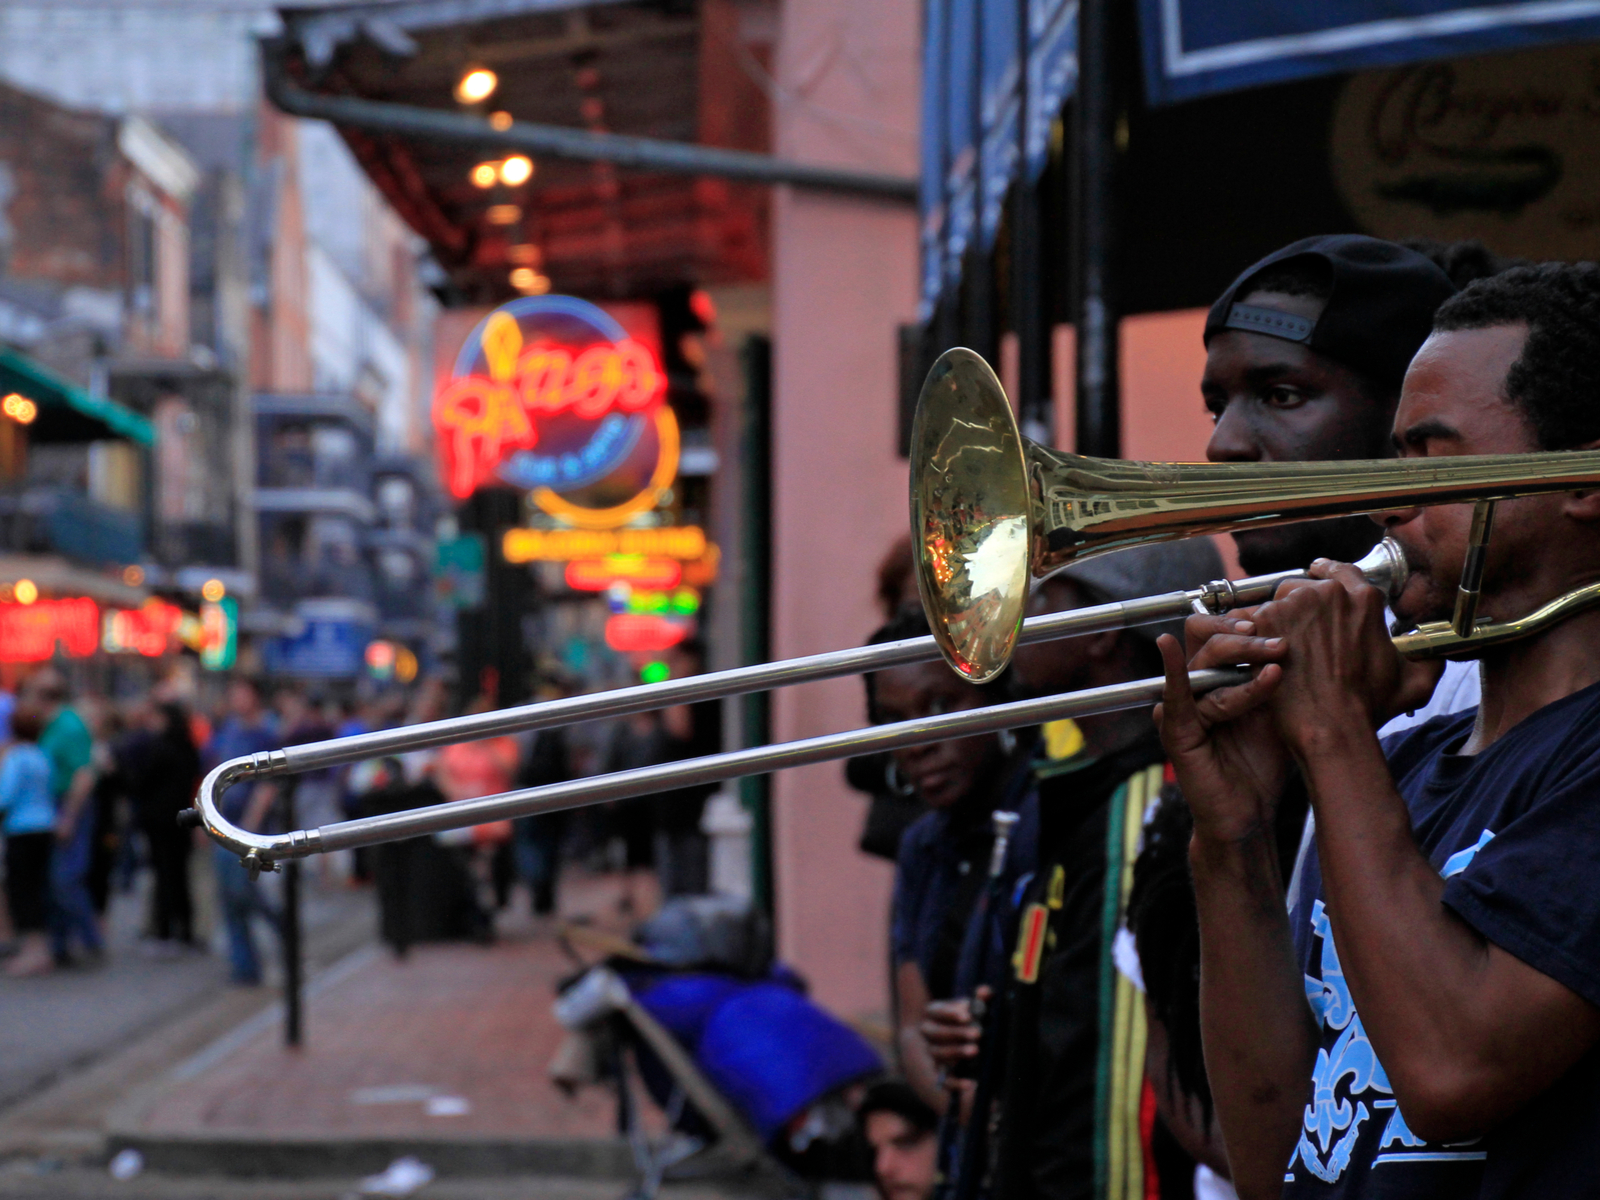 Live music played by a band on the street during the overall best time to visit New Orleans